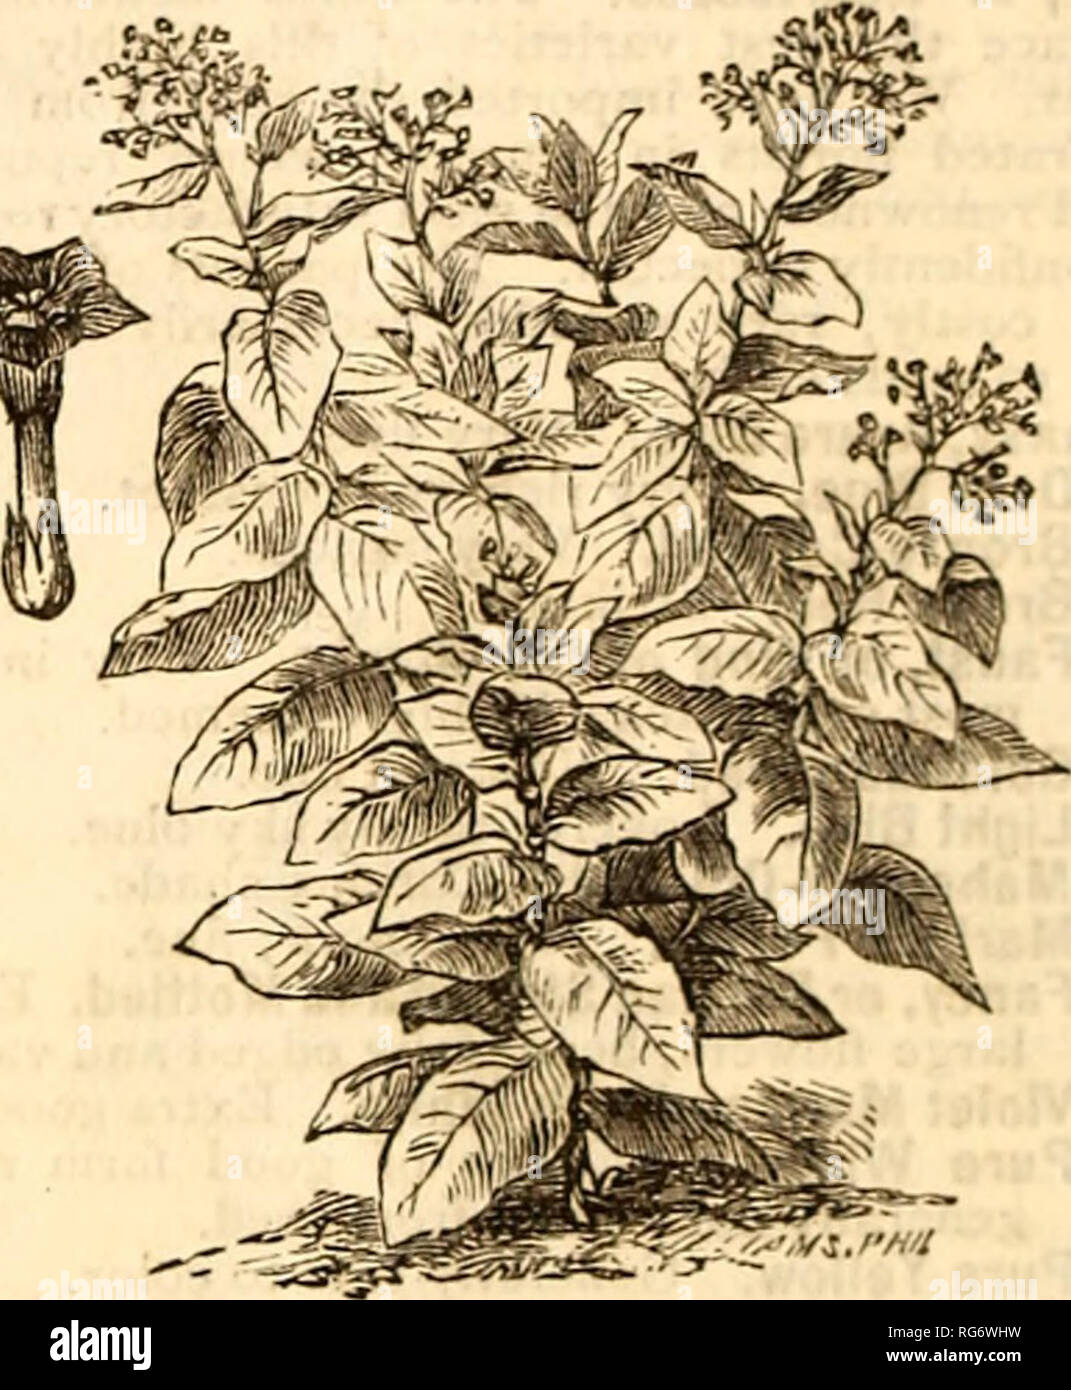 . Burpee's farm annual : garden, farm, and flower seeds, blooded stock. Nursery stock Pennsylvania Philadelphia Catalogs; Flowers Catalogs; Vegetables Catalogs; Seeds Catalogs. No. 240.—ScABiosA, Large Double. No. 121.—Godetia, Lady Aleemakle. 229. RicinuS, Sanguineus. Red stalks, scarlet fruit; 5 ft. 230. BraziliensiS. Dark-green fruit; lo ft. 231. Gibsoni, new, with dark purple stem and leaves, very fine and ornamental. 232. New Species from the Phillipines ; very large leaves ; grows 6 to 10 ft. high. 233. Nanus Microcarpus. Dwarf, grows only 2 to 3 ft. in height ; fine for groups. 234. Com Stock Photo